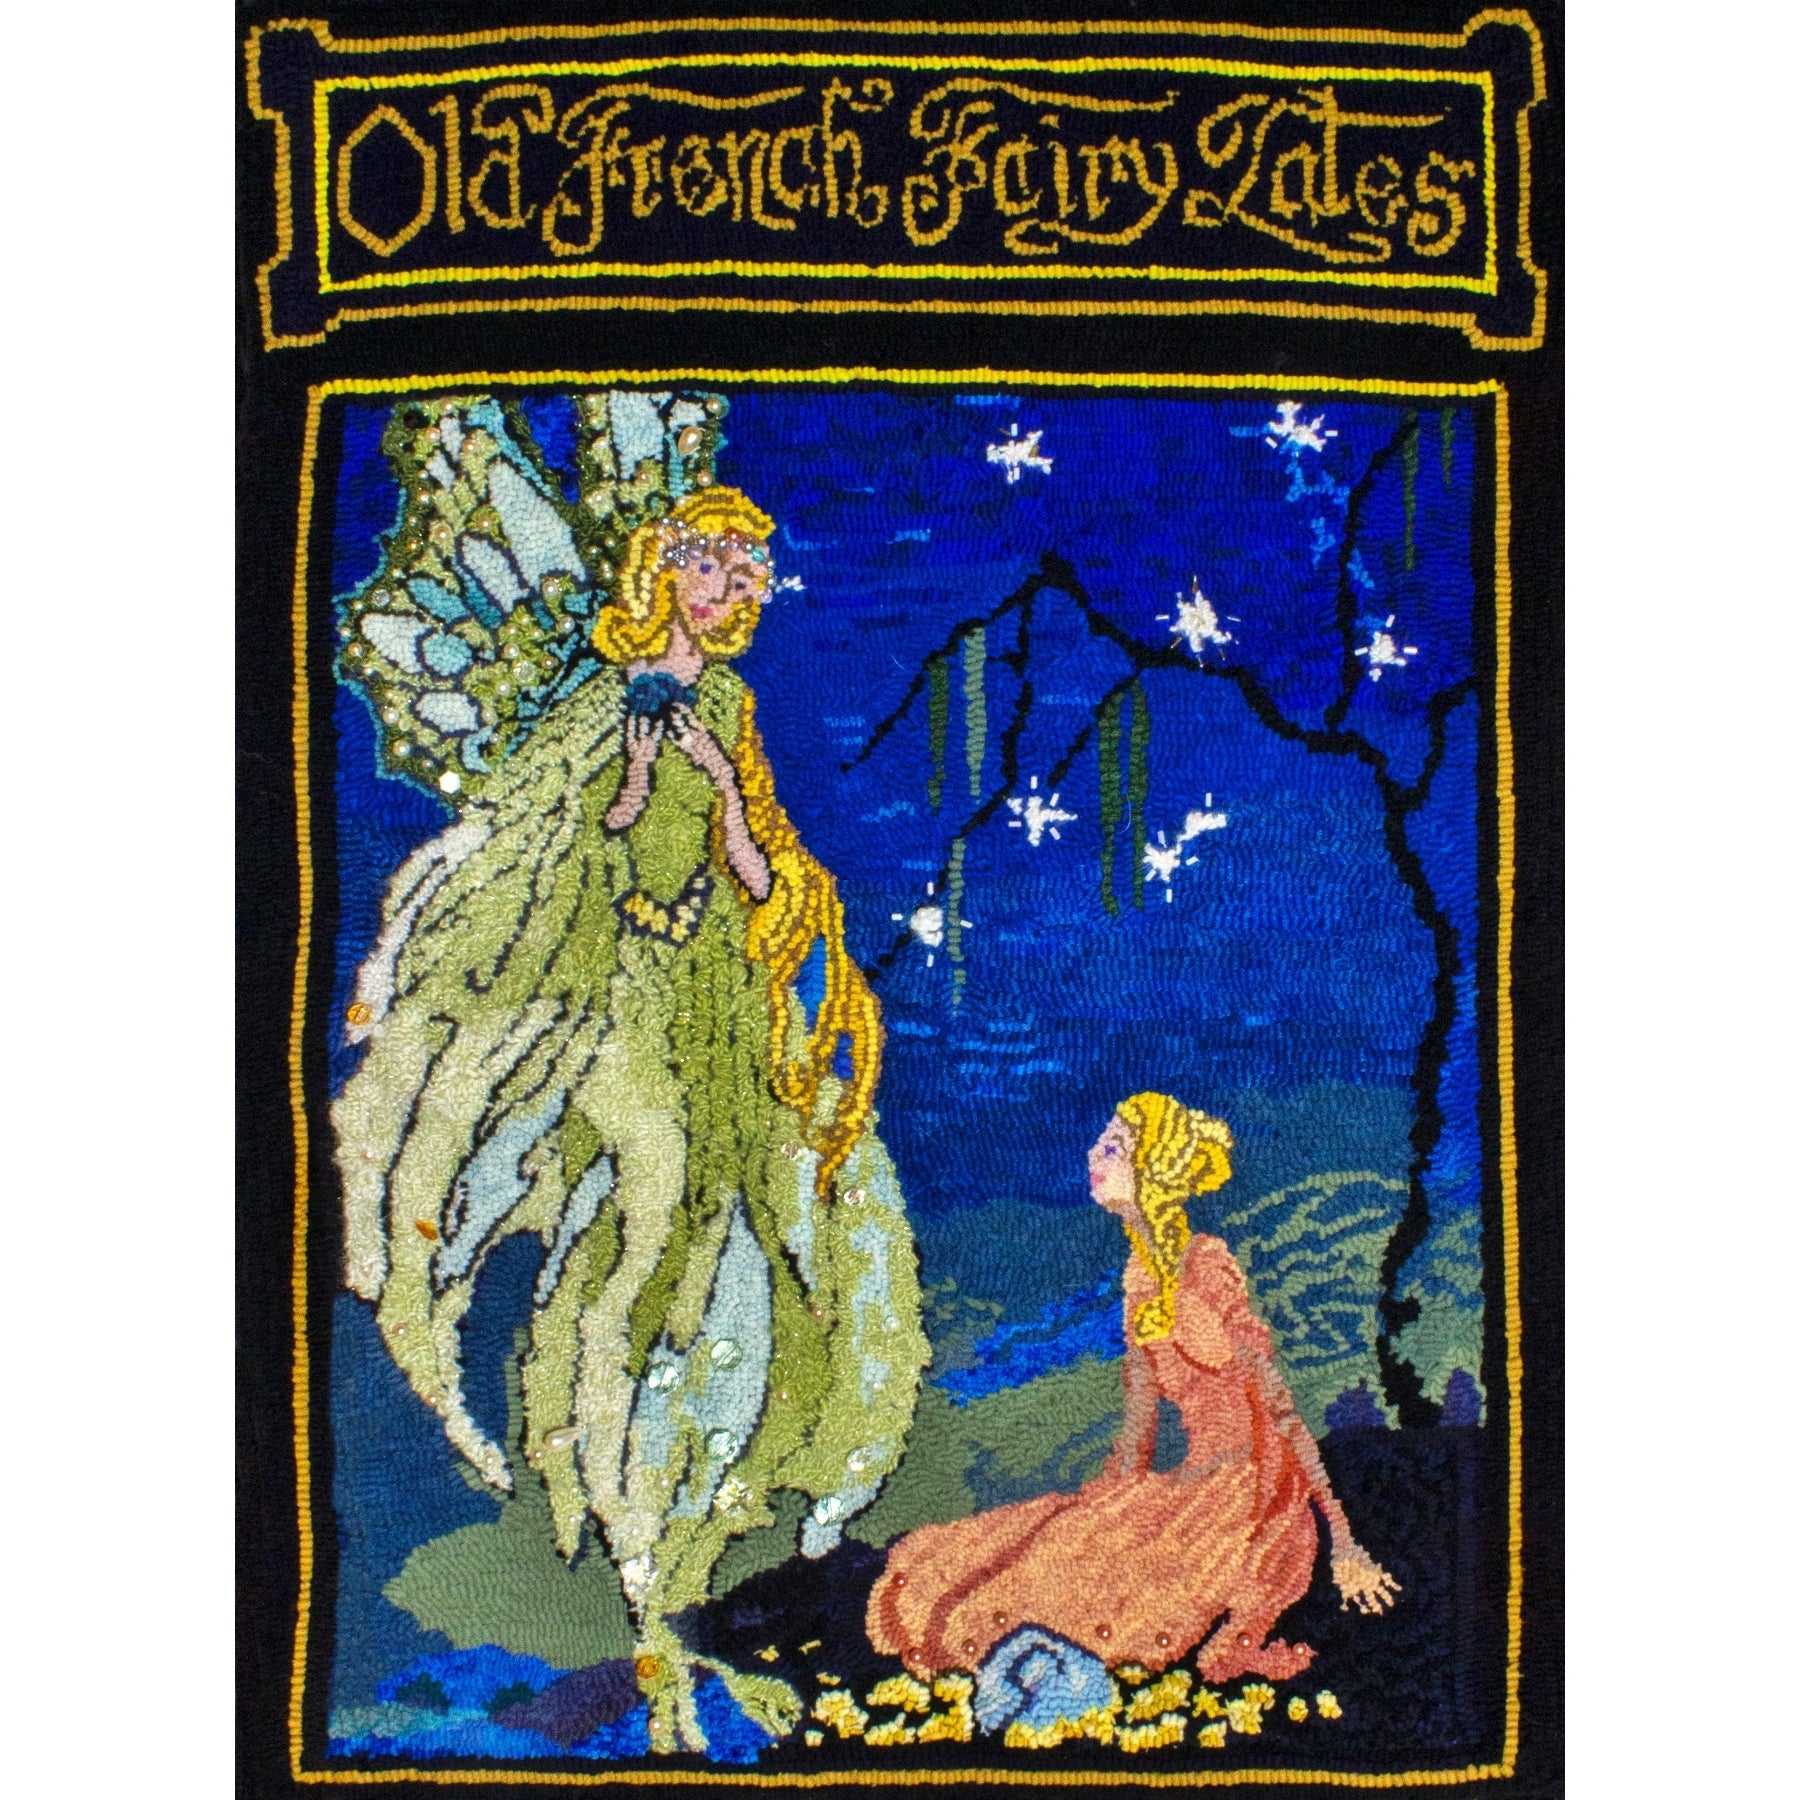 Old French Fairy Tales Book Cover ill. Virginia Frances Sterrett, 1920, rug hooked by Elyse Olson